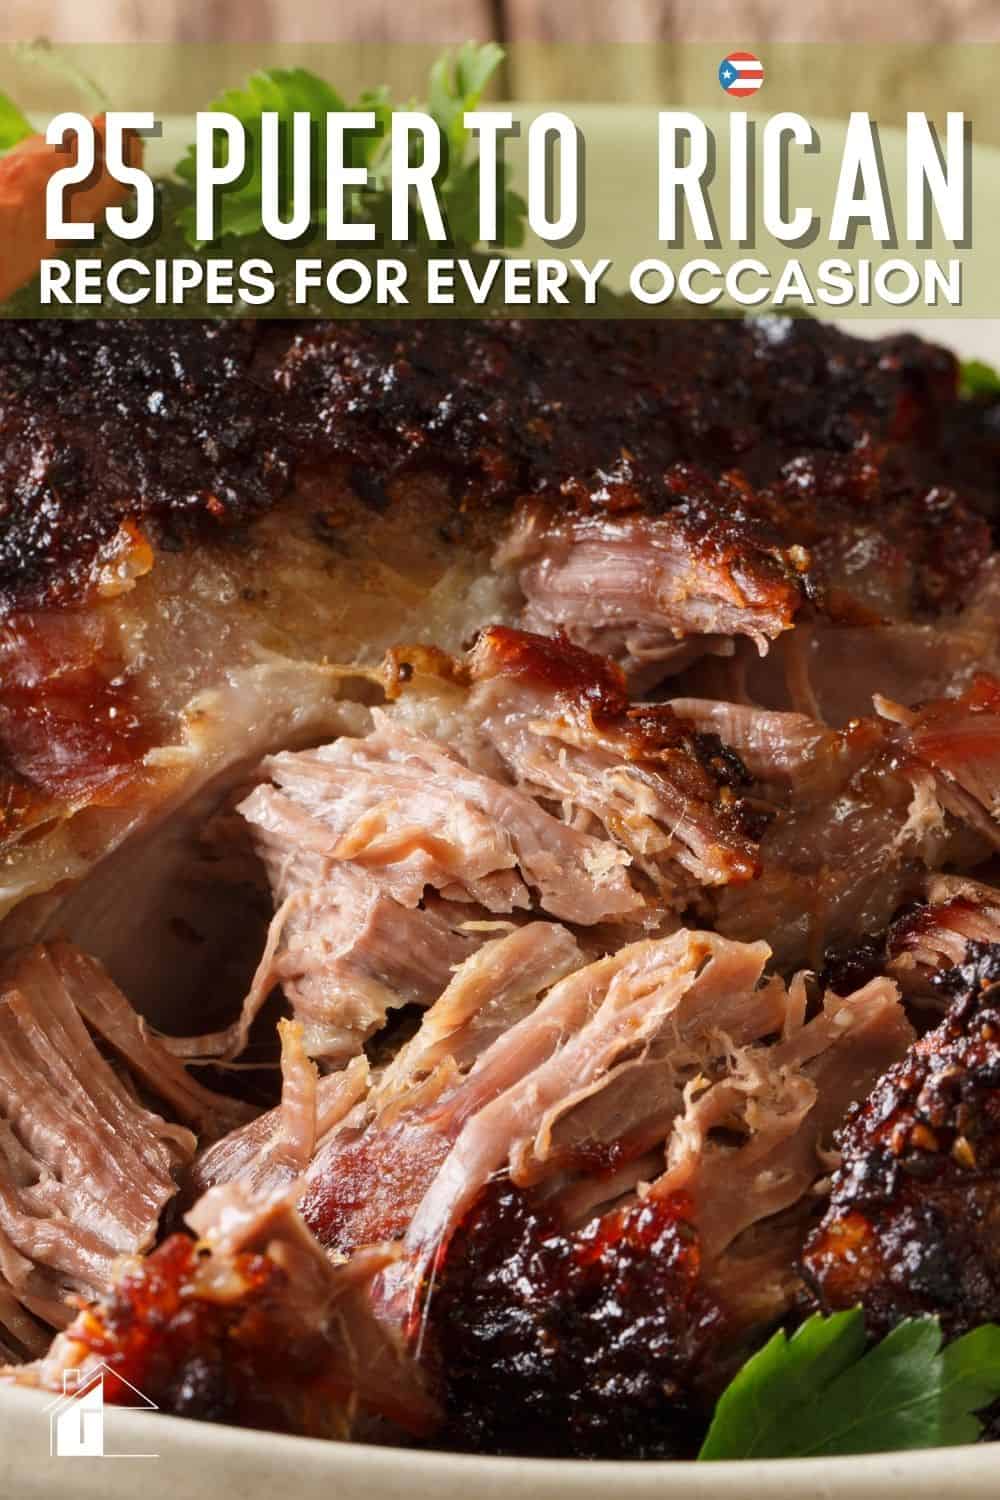 Tired of the same old dishes? Look no further than the island that has been a melting pot for centuries. Explore these 25 authentic and traditional recipes from all over this beautiful country, ranging from classic favorites like bacalaitos (codfish fritters) to modern-day recipes that can be made using an Instant Pot. You'll never get bored again! via @mystayathome